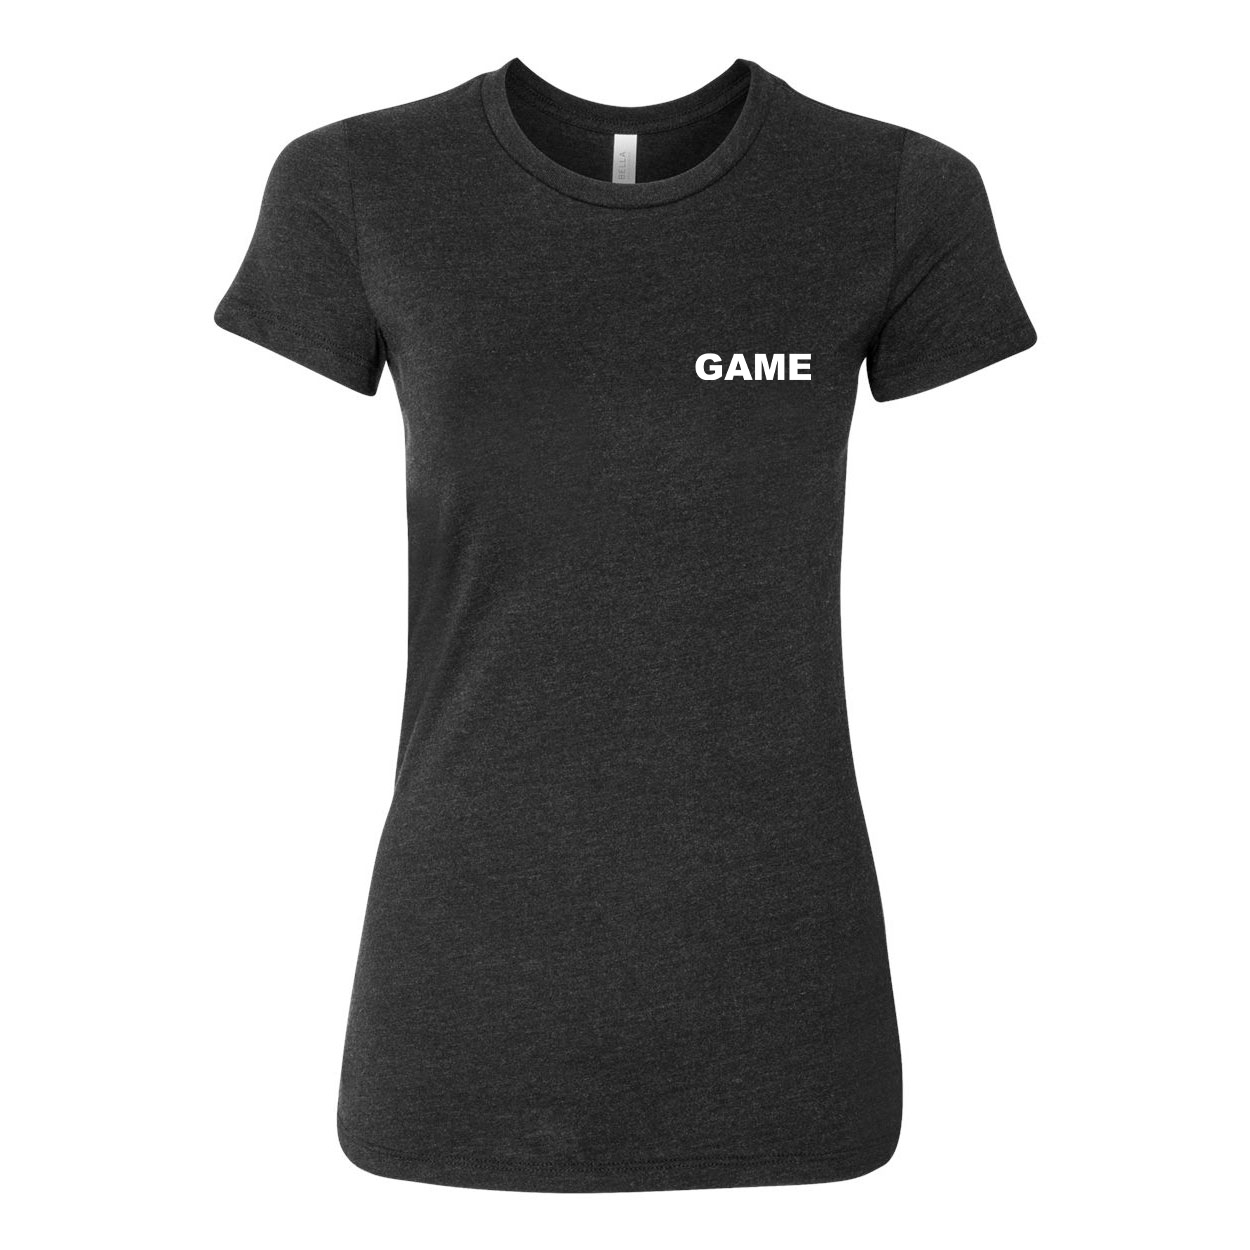 Game Brand Logo Night Out Womens Fitted T-Shirt Dark Heather Gray